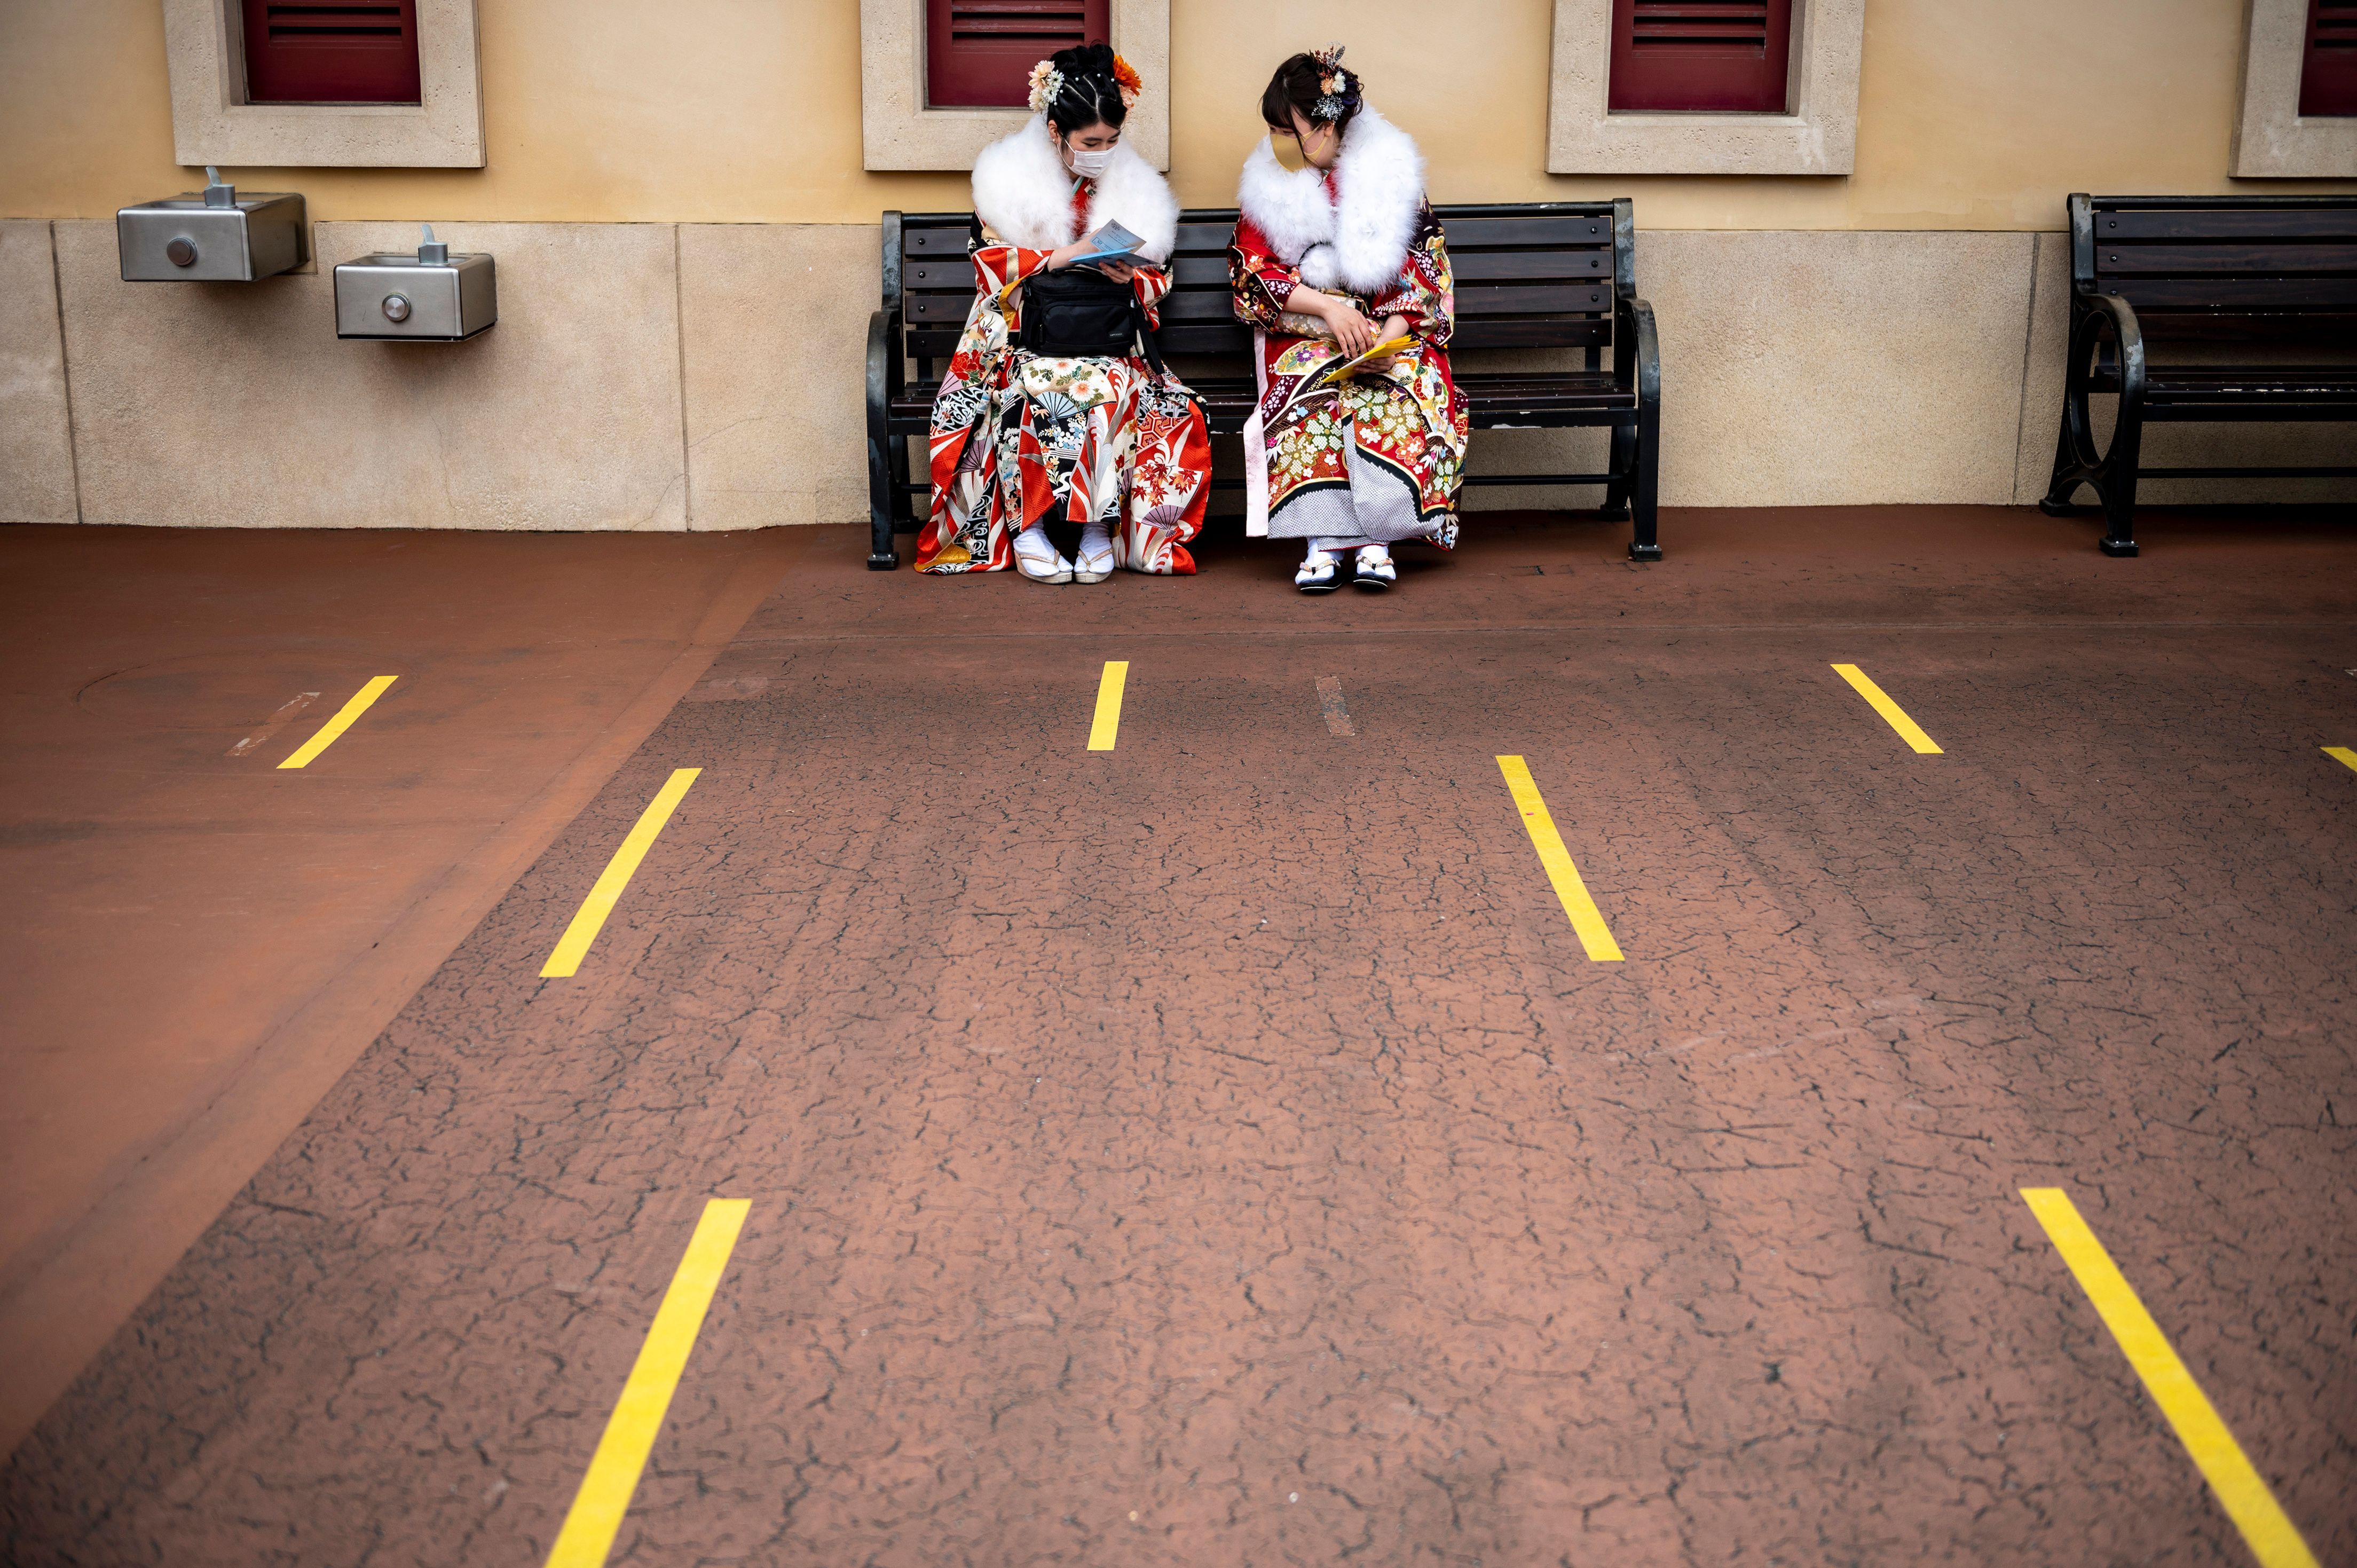  Twenty-year-old women wearing kimonos wait to attend a postponed "Coming-of-Age Day" celebration ceremony, due to the COVID-19 pandemic, at DisneySea in Urayasu on March 7